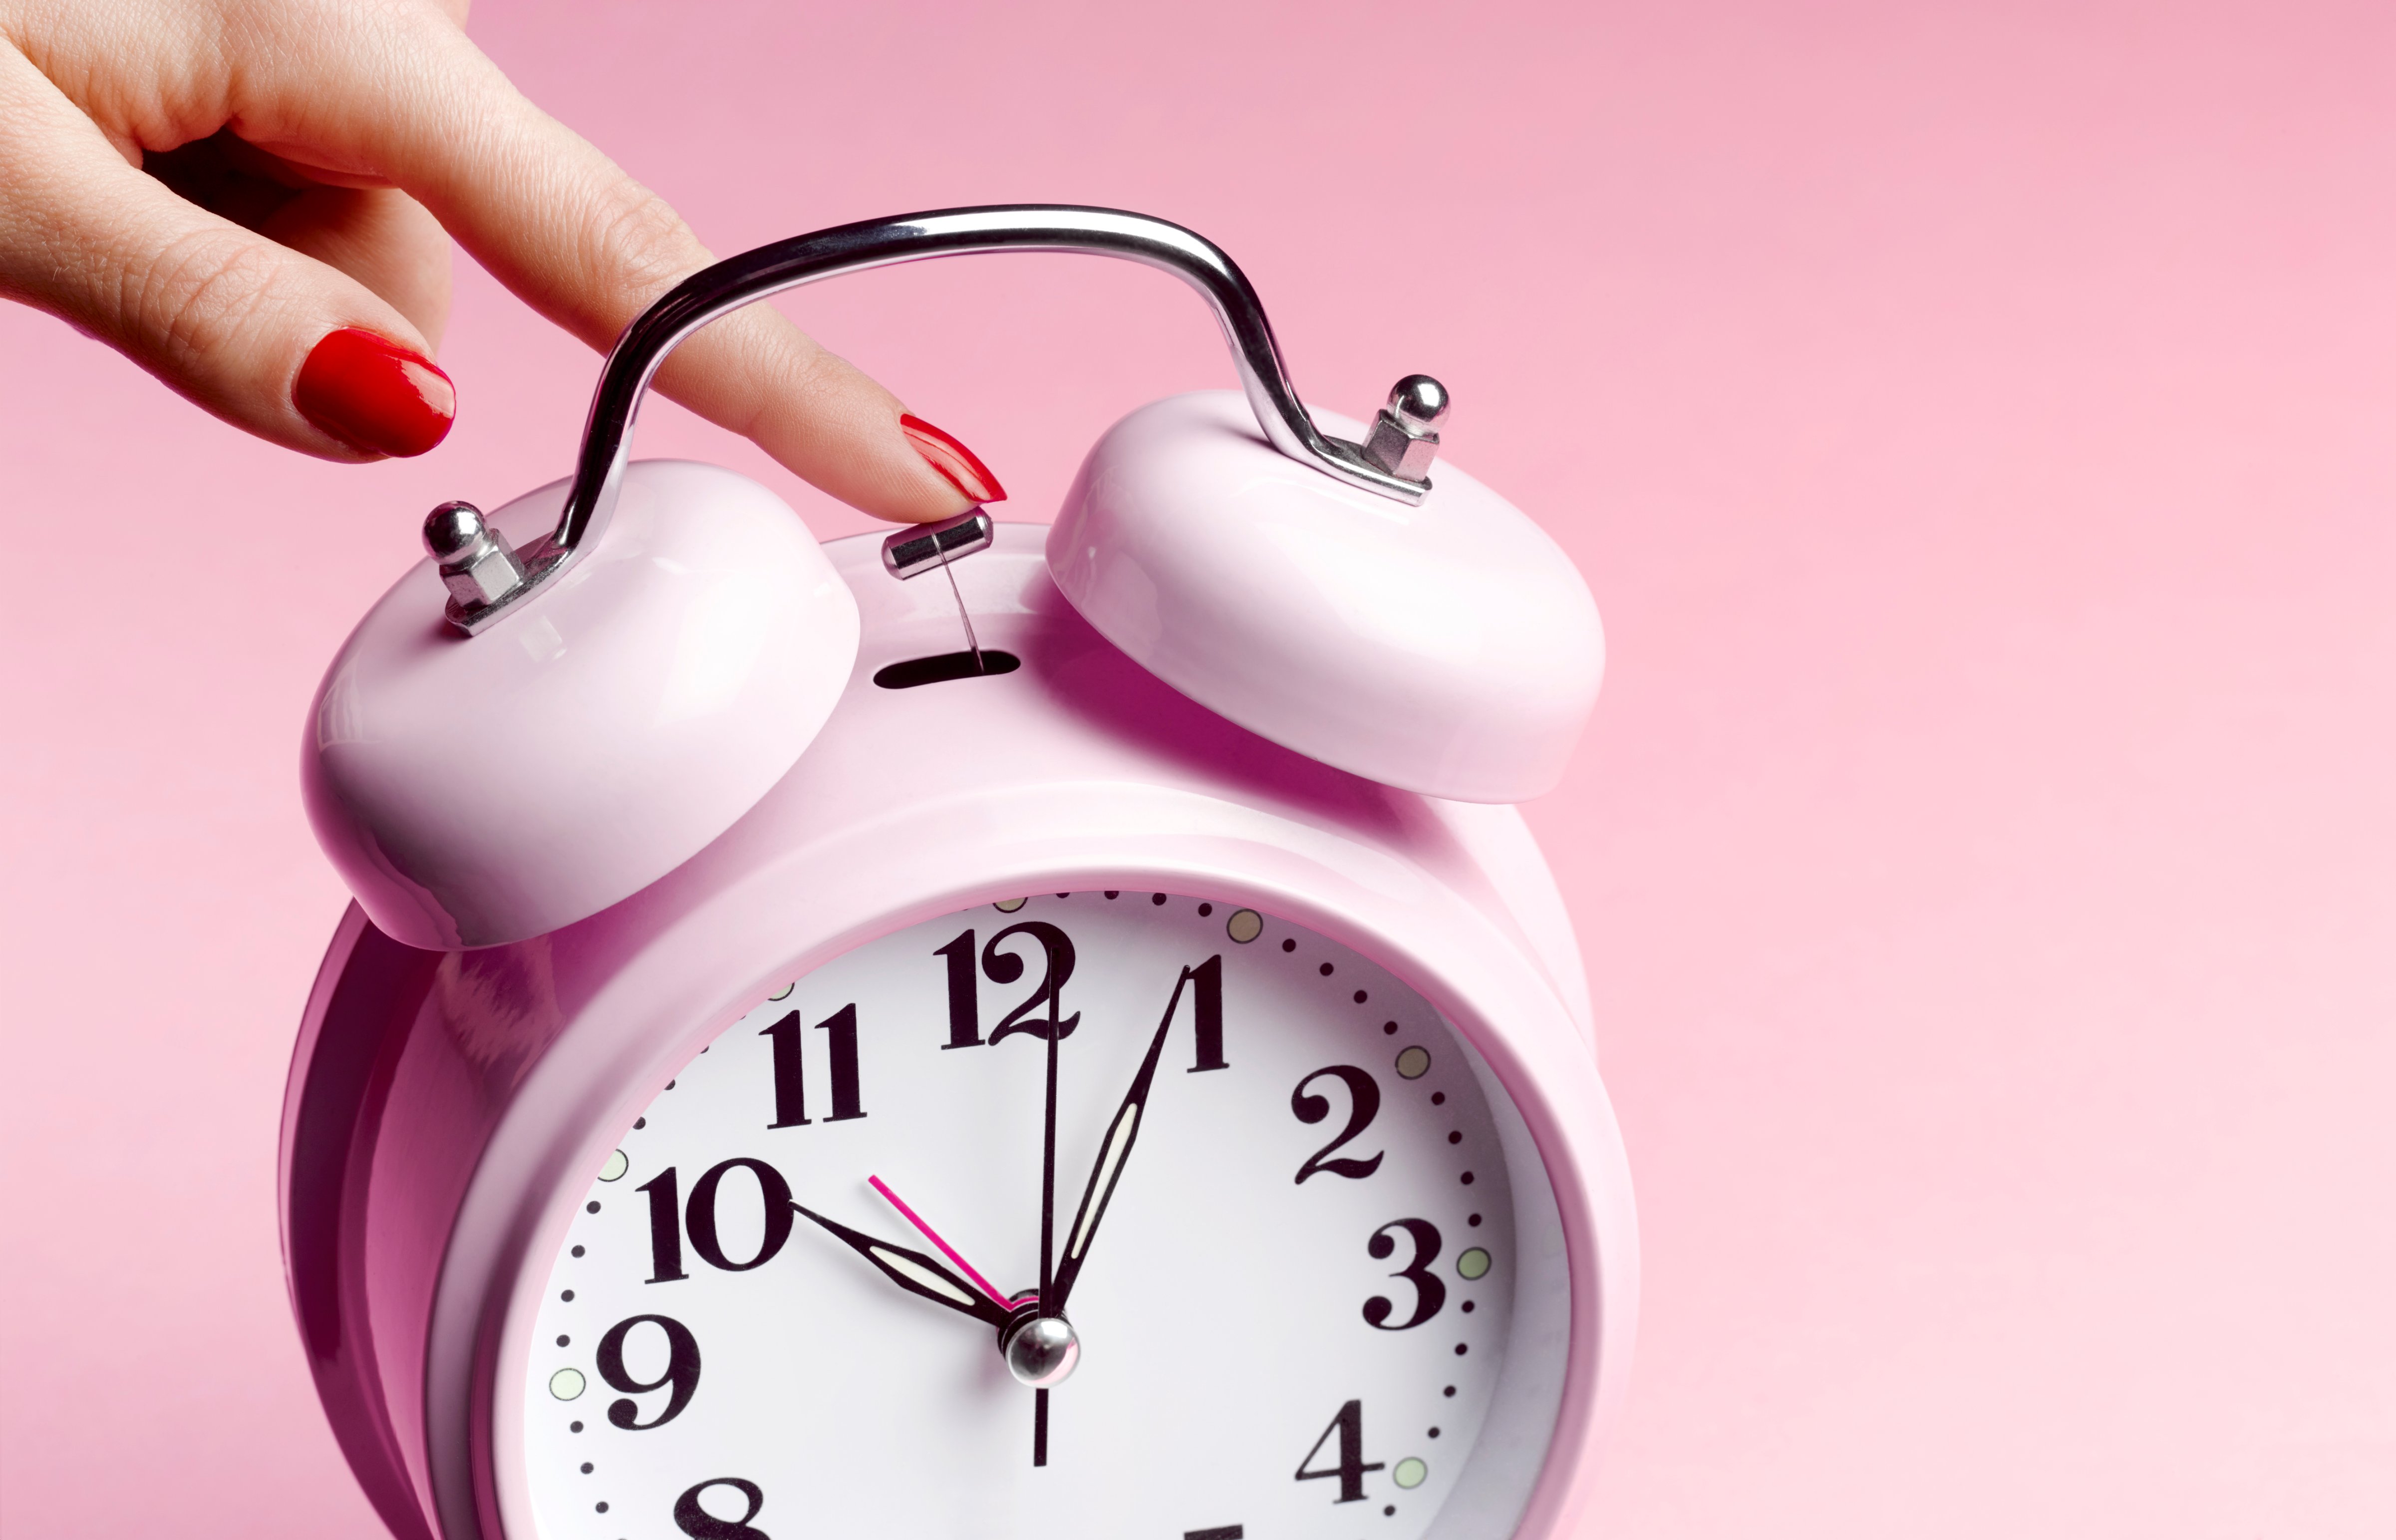 Stopping pink alarm clock deadline (Getty Images)